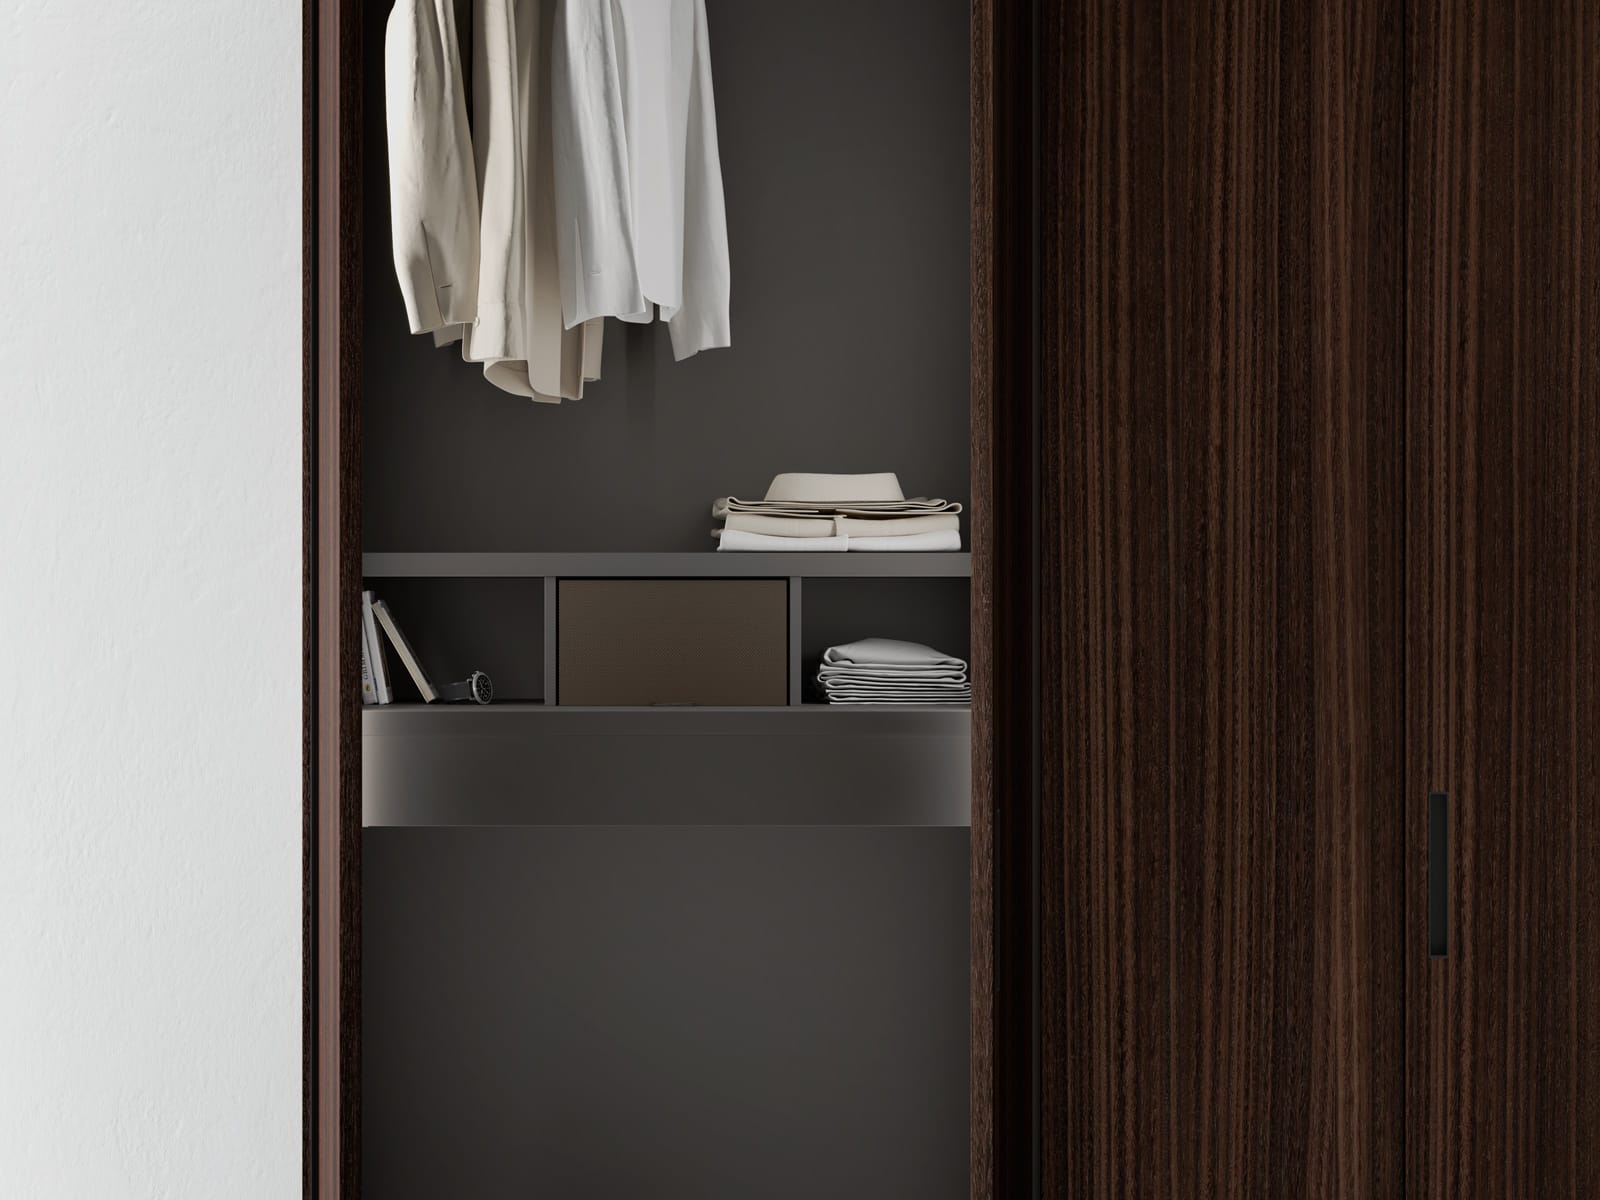 Wardrobe with exterior in Eucalyptus. Customized interior in Ombra matte lacquer with drawer and shelves grid featuring an extractable basket in faux leather finish.⁠